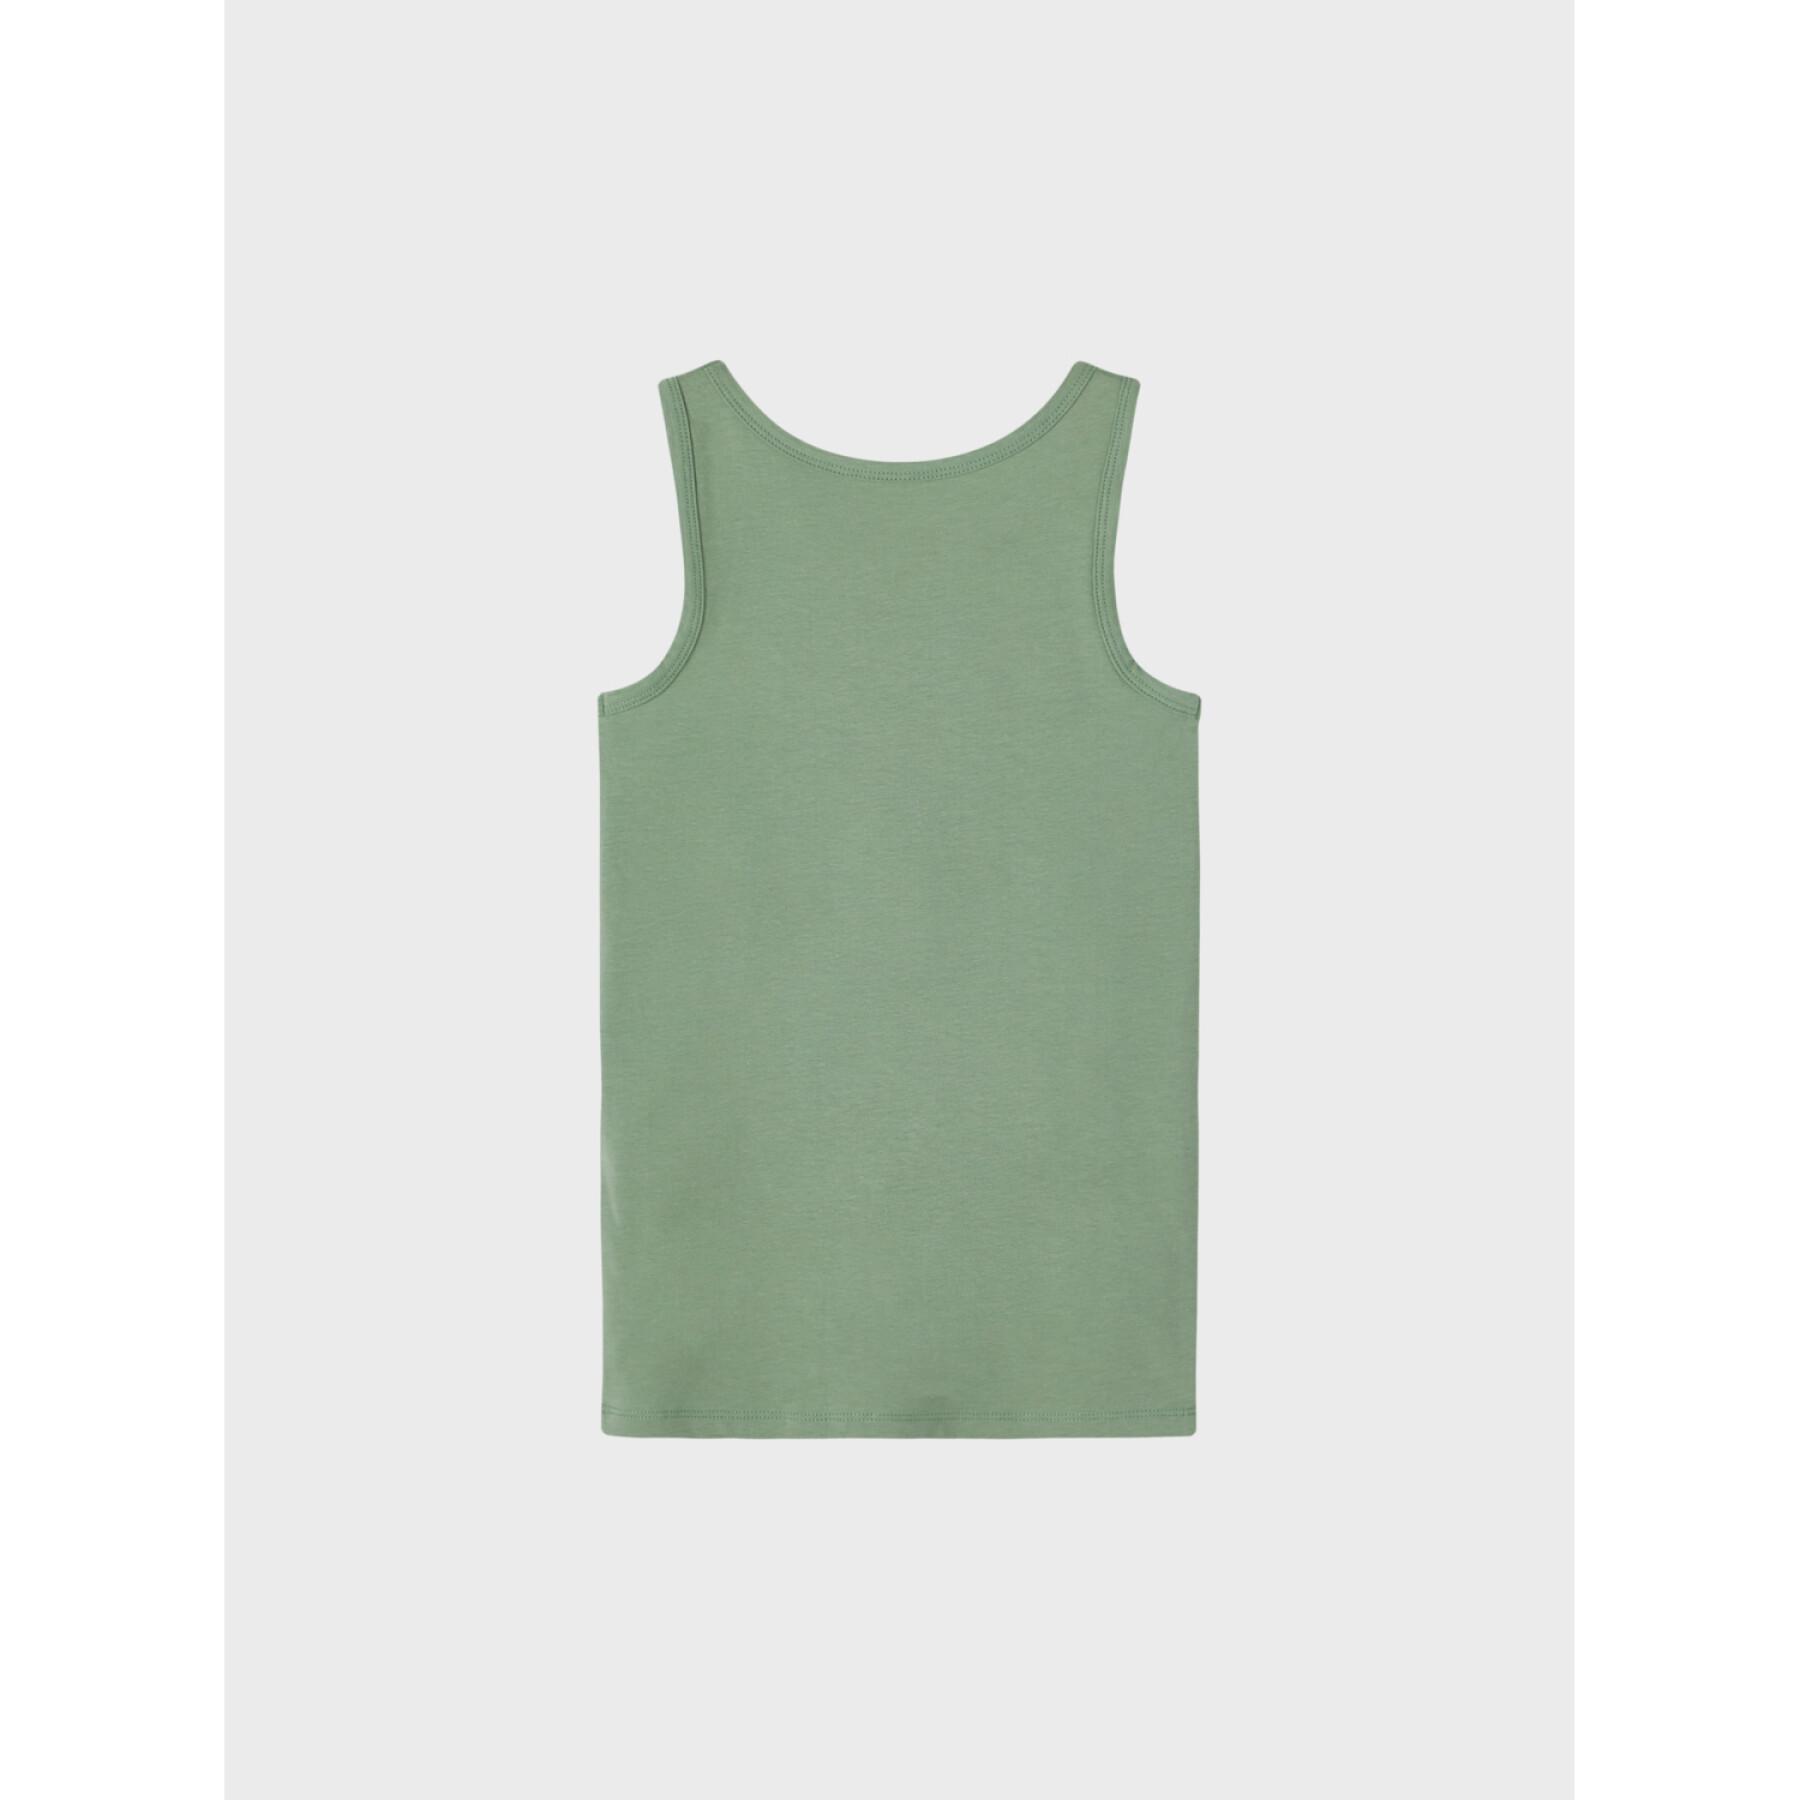 Pack of 2 children's tank tops Name it Hedge